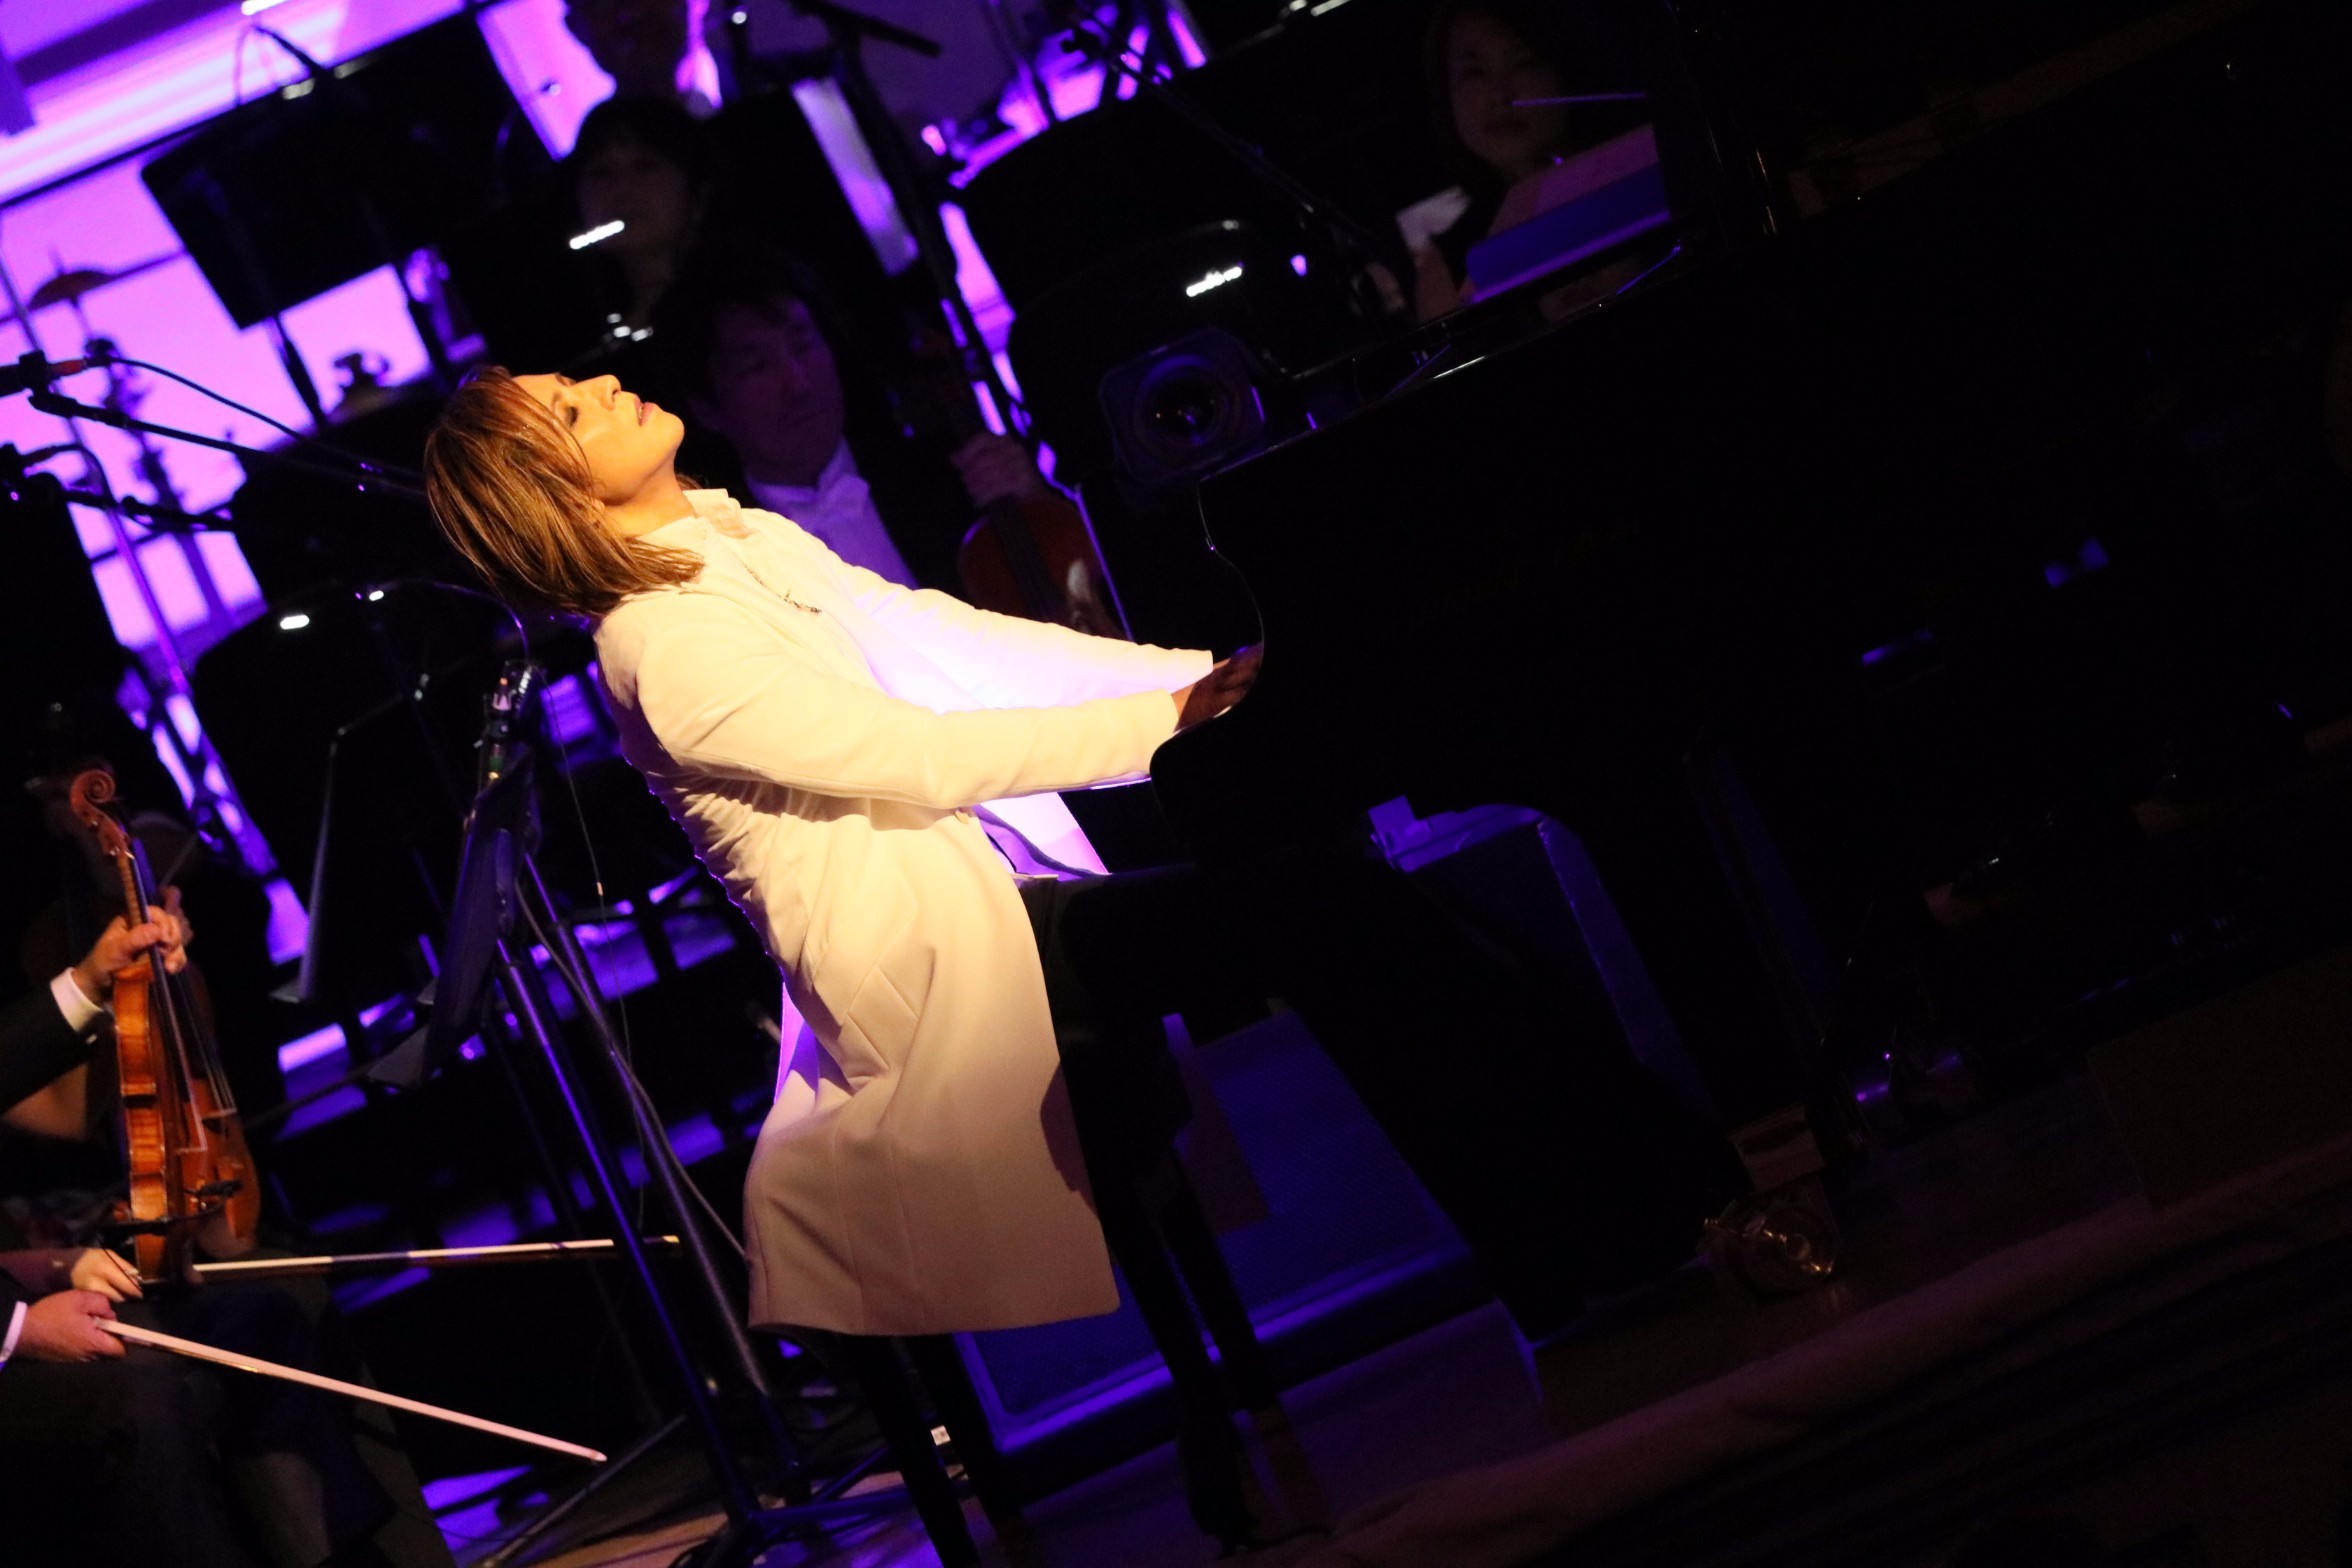 『YOSHIKI CLASSICAL SPECIAL feat.Tokyo Philharmonic Orchestra』